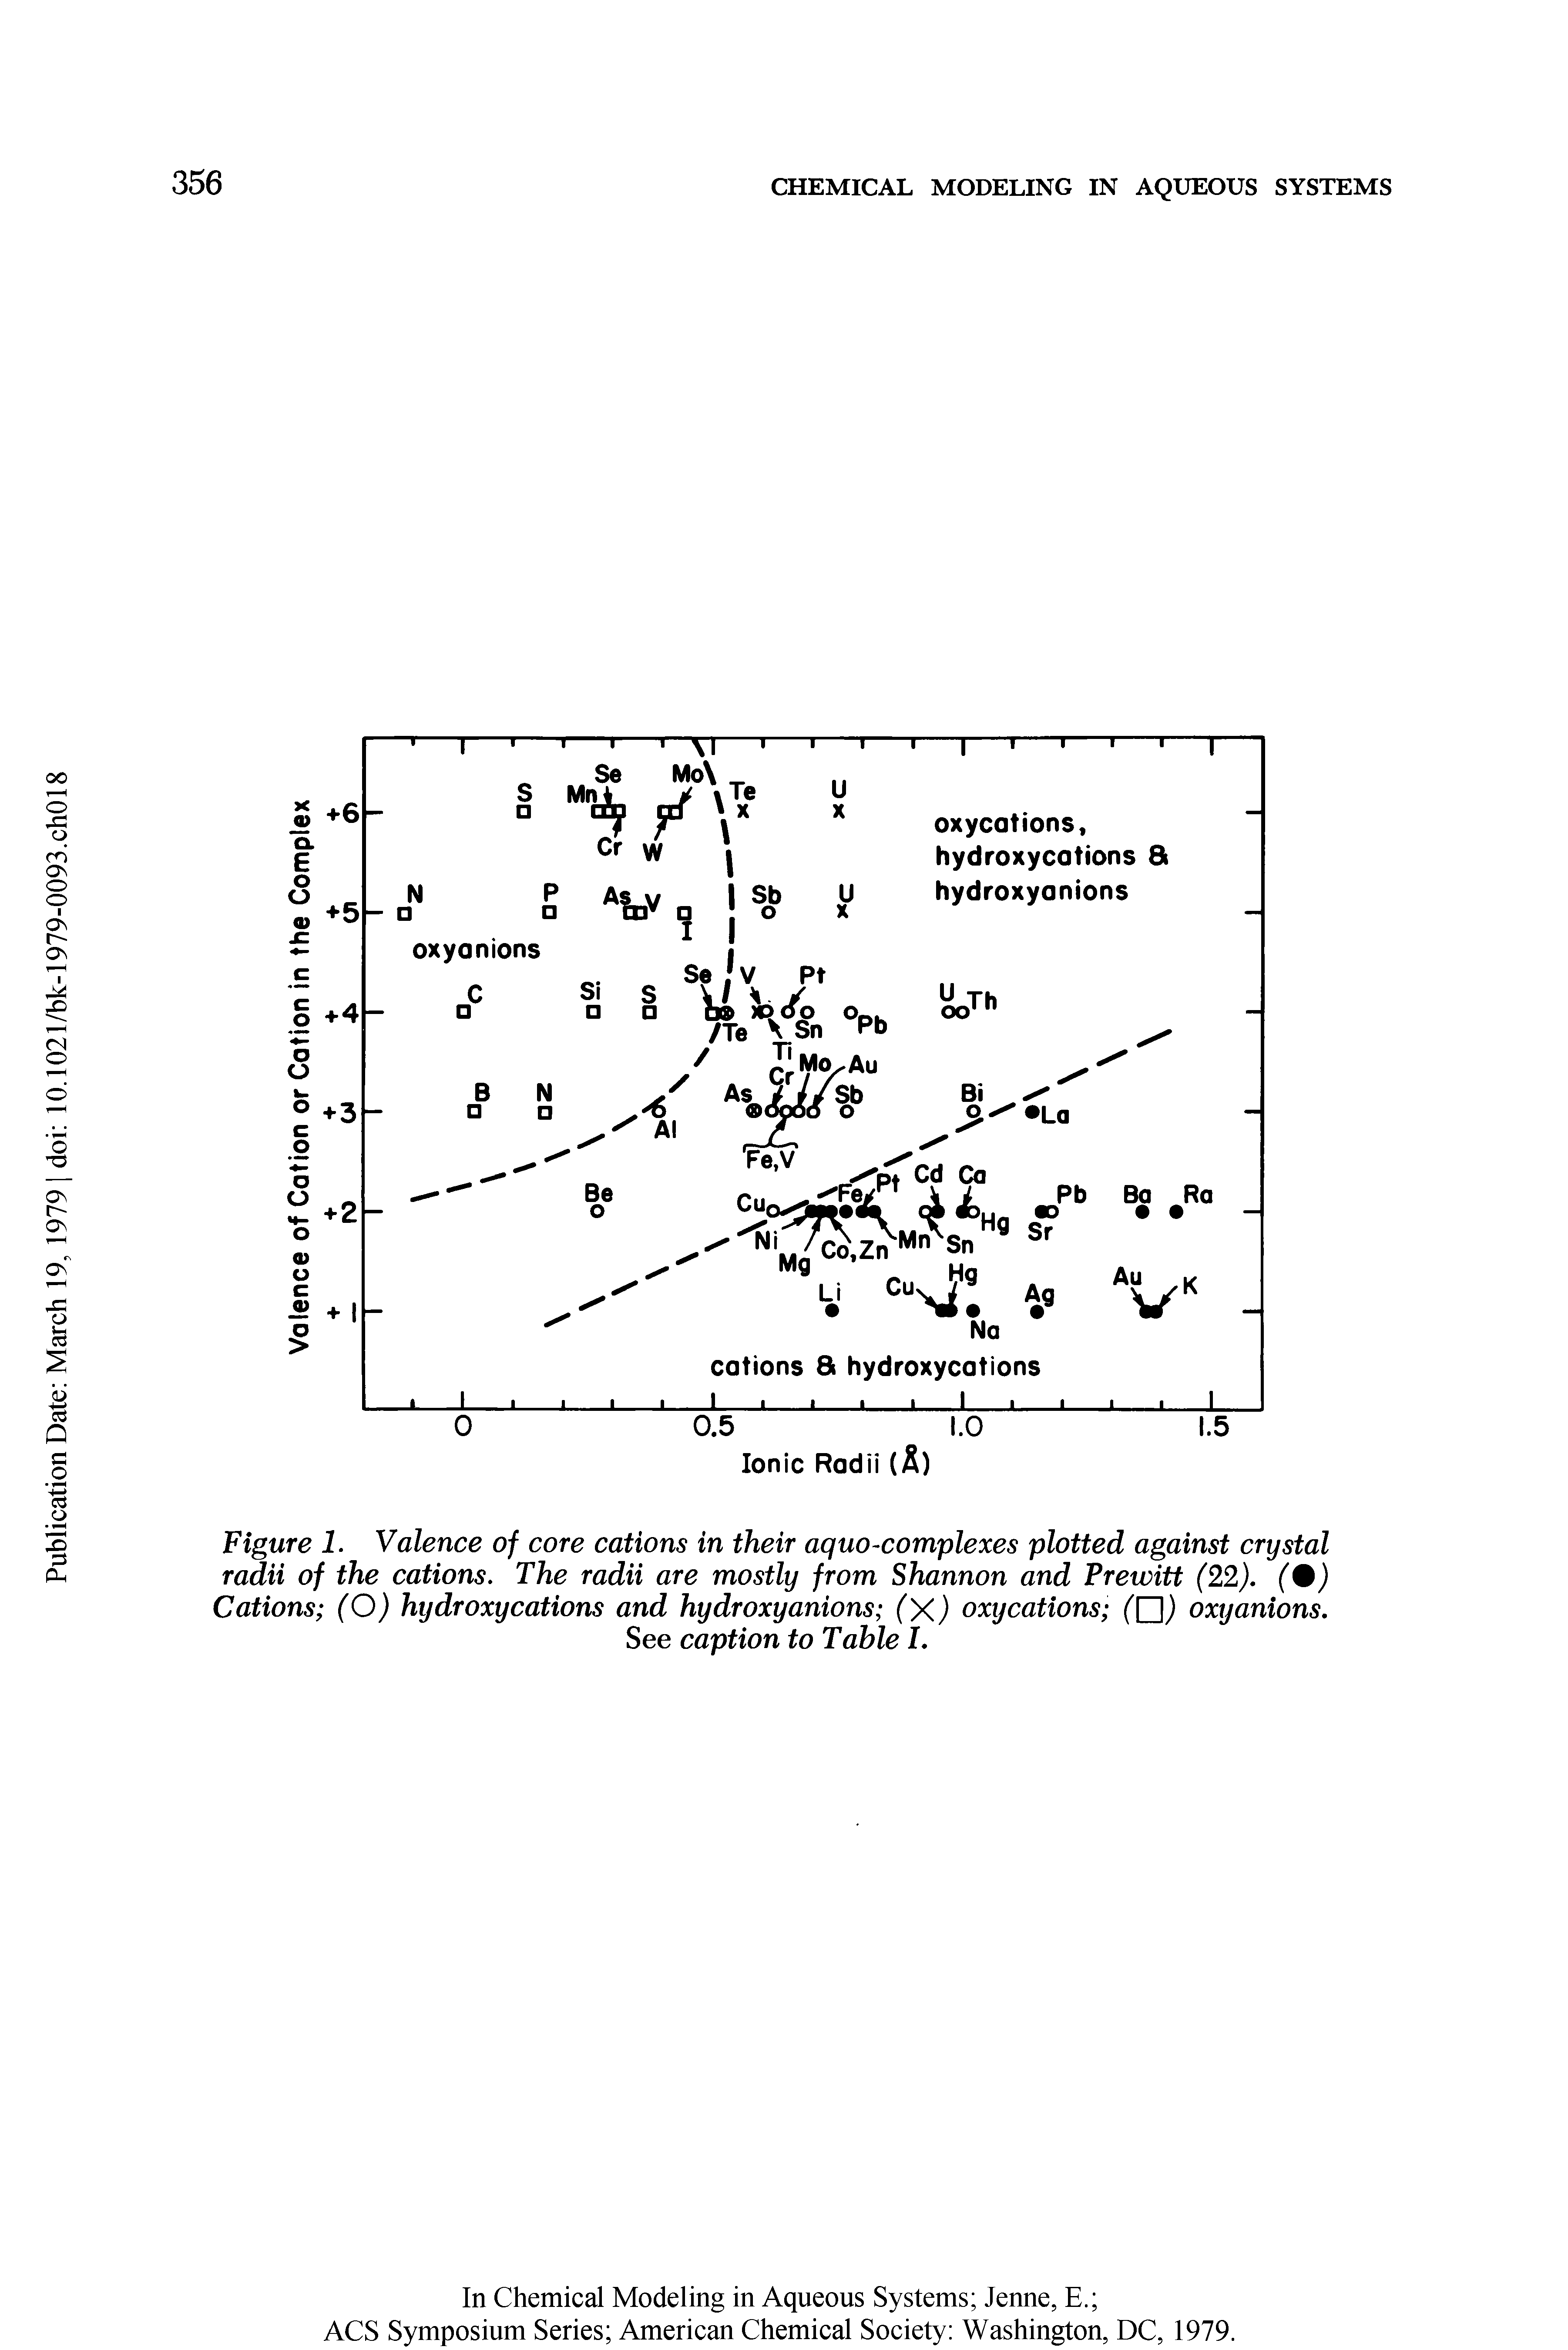 Figure 1. Valence of core cations in their aquo complexes plotted against crystal radii of the cations. The radii are mostly from Shannon and Prewitt (22). (0) Cations (O) hydroxy cations and hydroxy anions (X) oxy cations oxy anions.